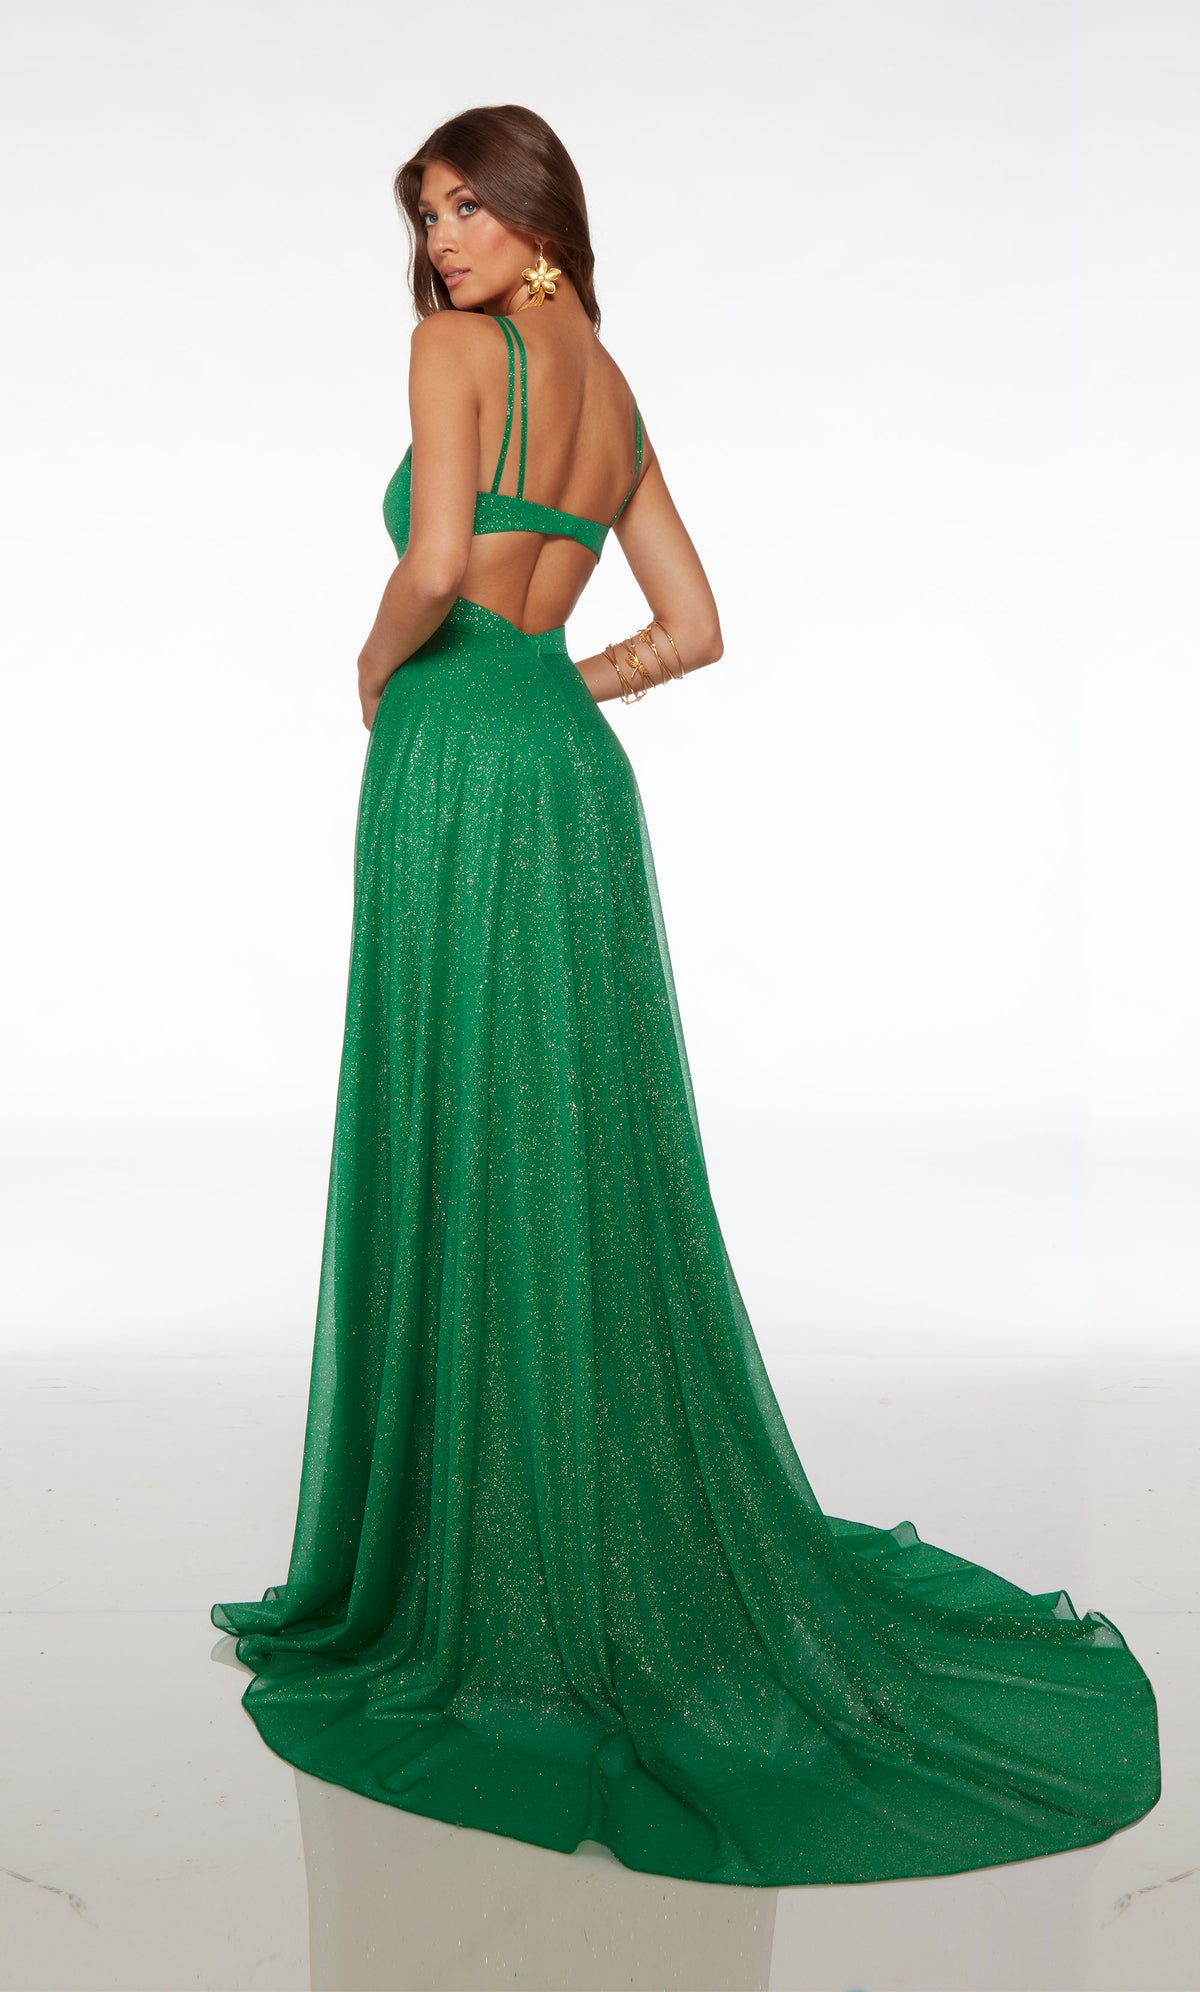 Flowy glitter tulle A-line formal dress with an V neckline, dual spaghetti straps, side cutouts, slit, open back, and elegant train in emerald green.